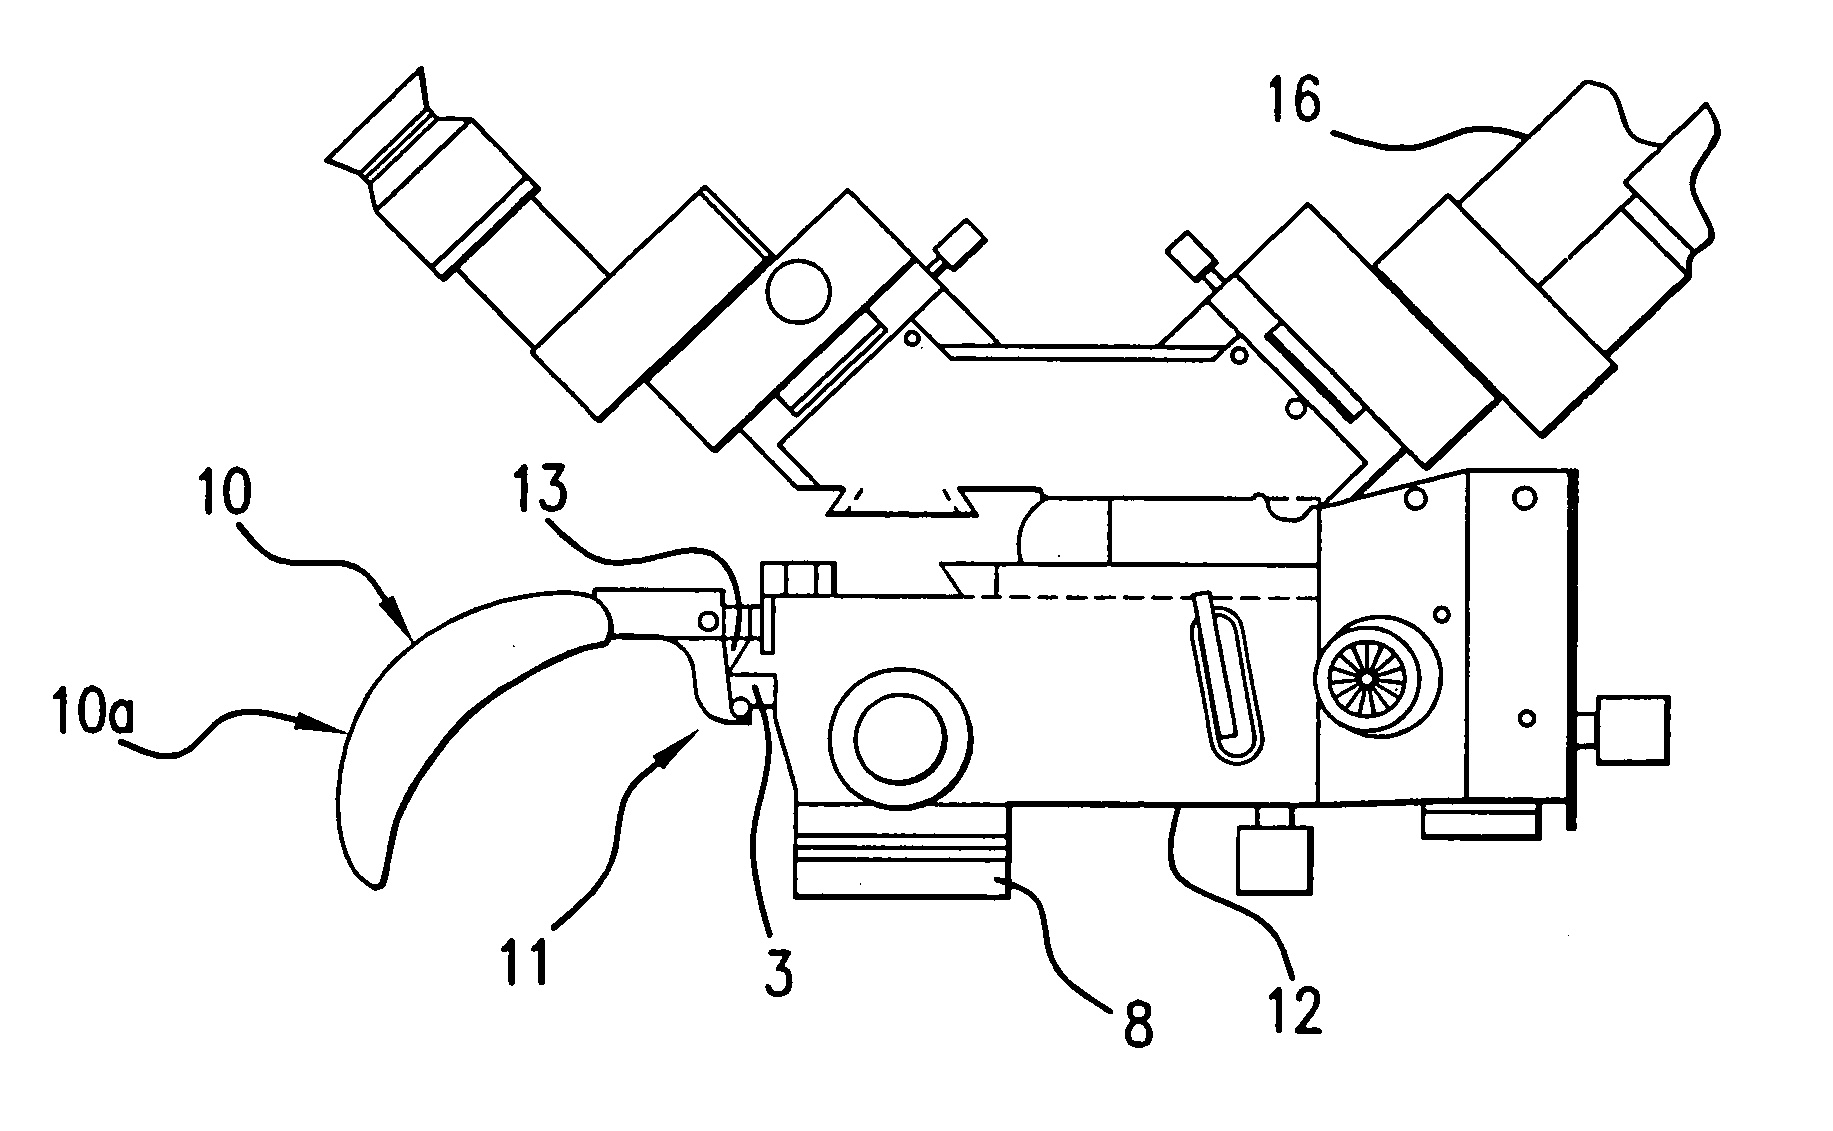 Microscope with a handle and/or hand-grip for a microscope